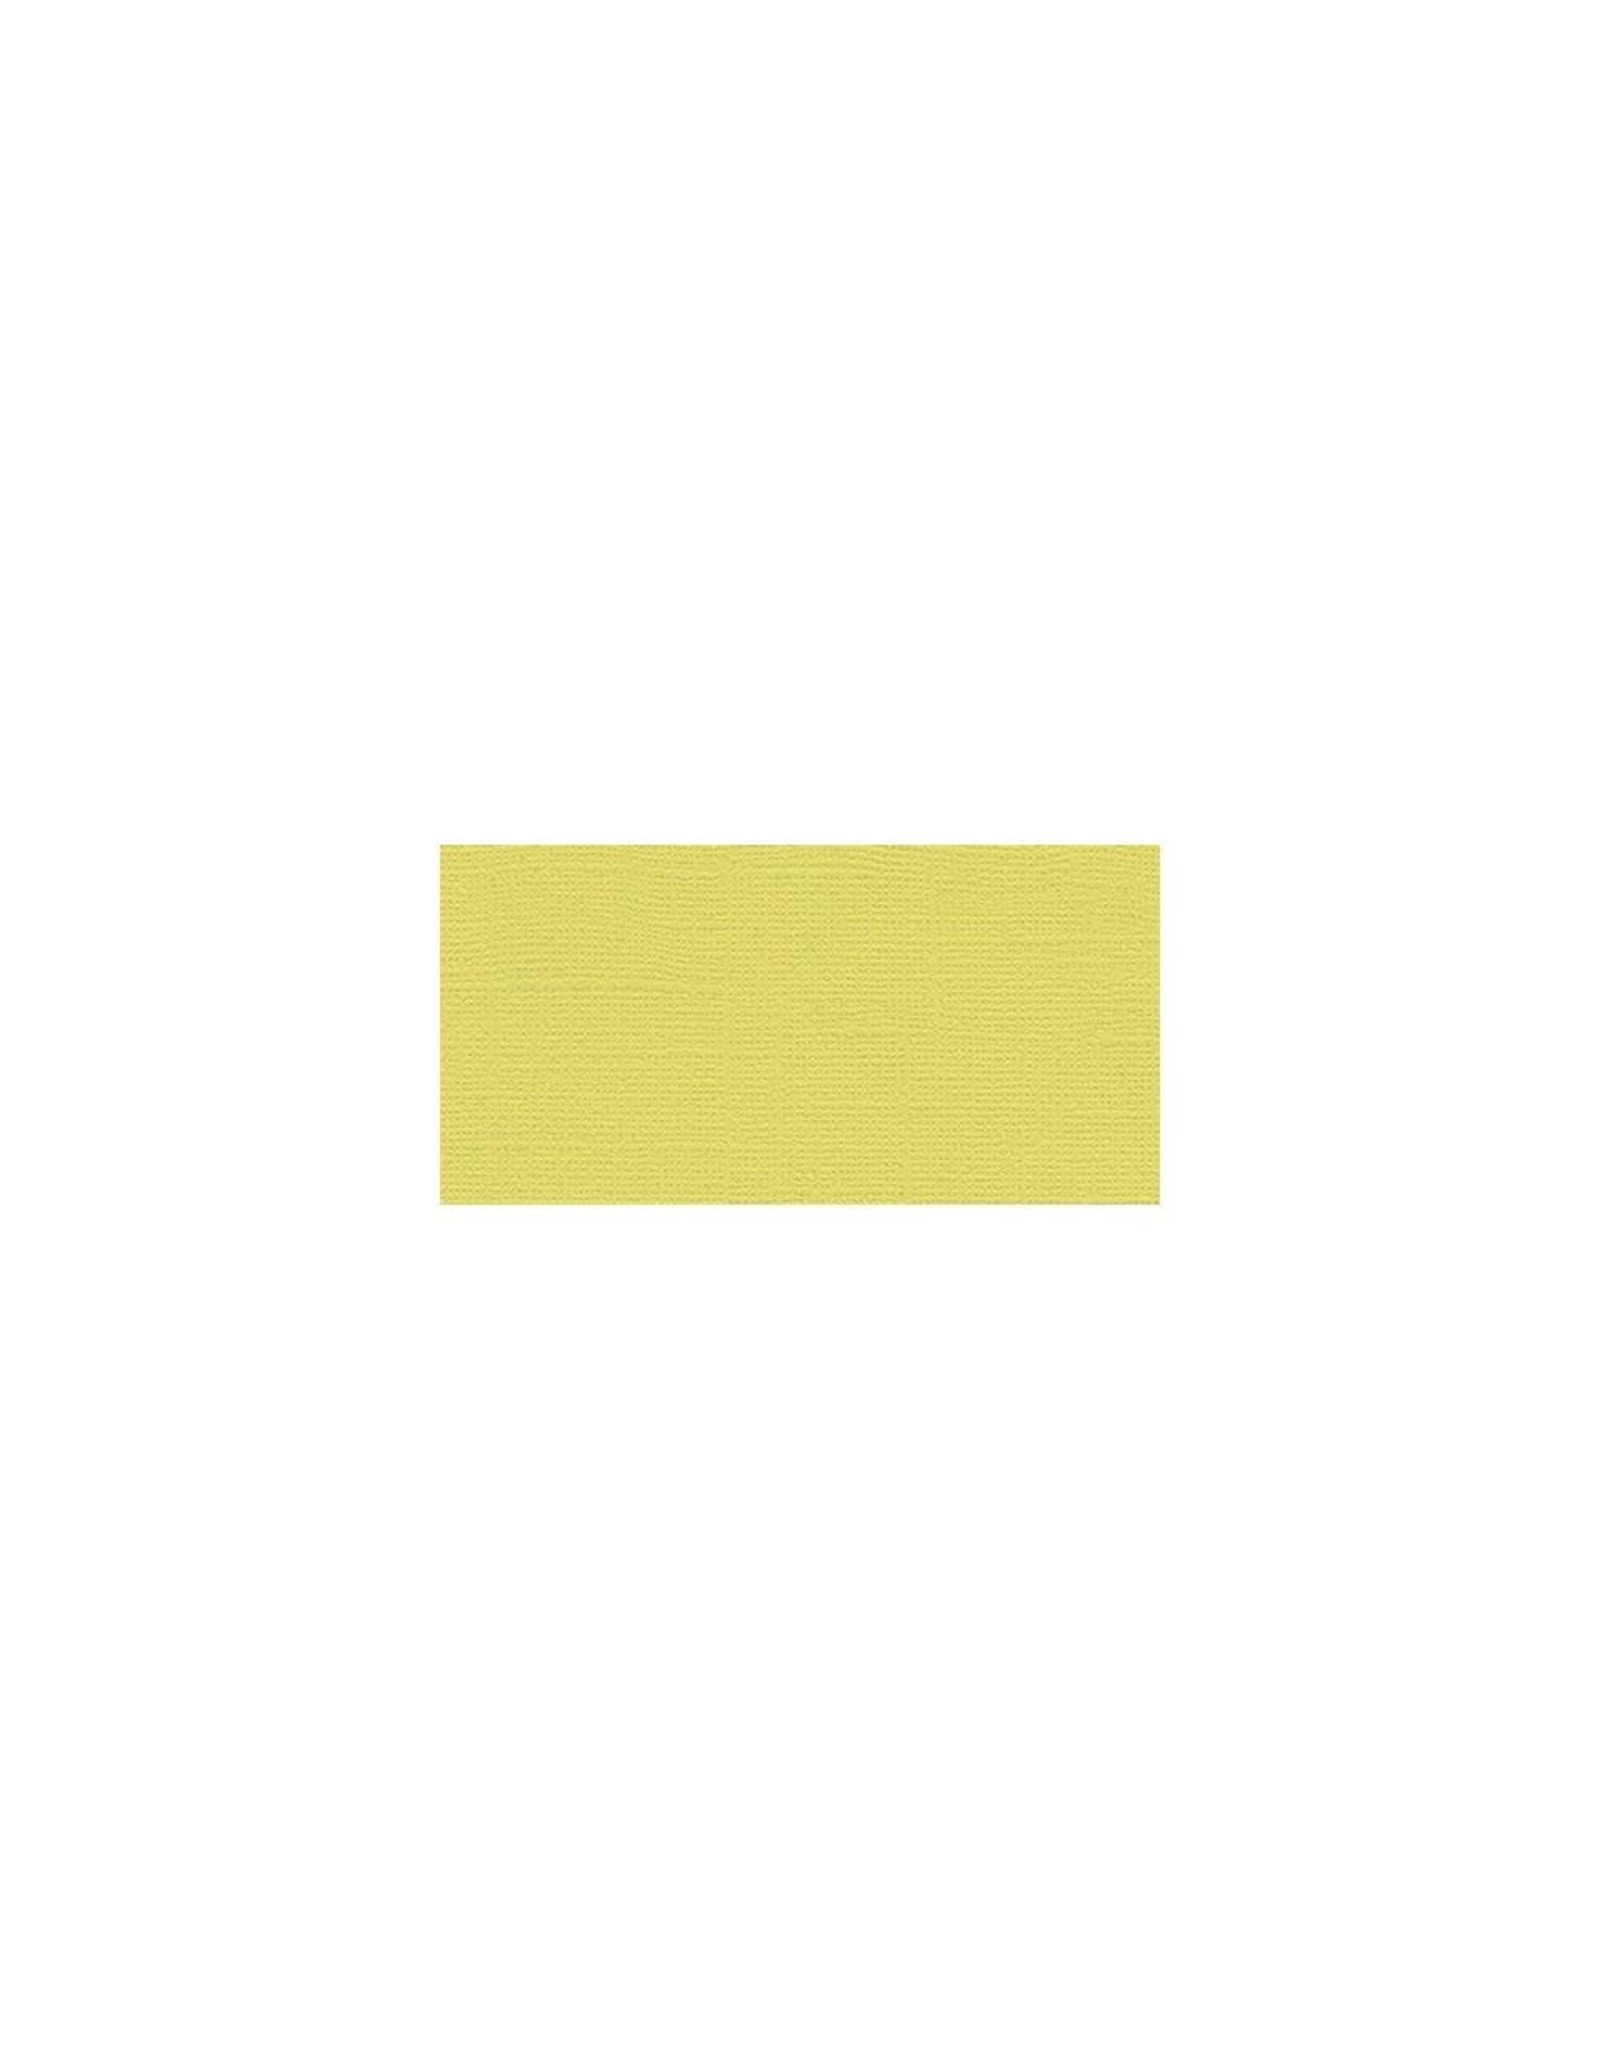 MY COLORS MY COLORS CANVAS 80 LB COVER WEIGHT YELLOW CORN 12x12 CARDSTOCK